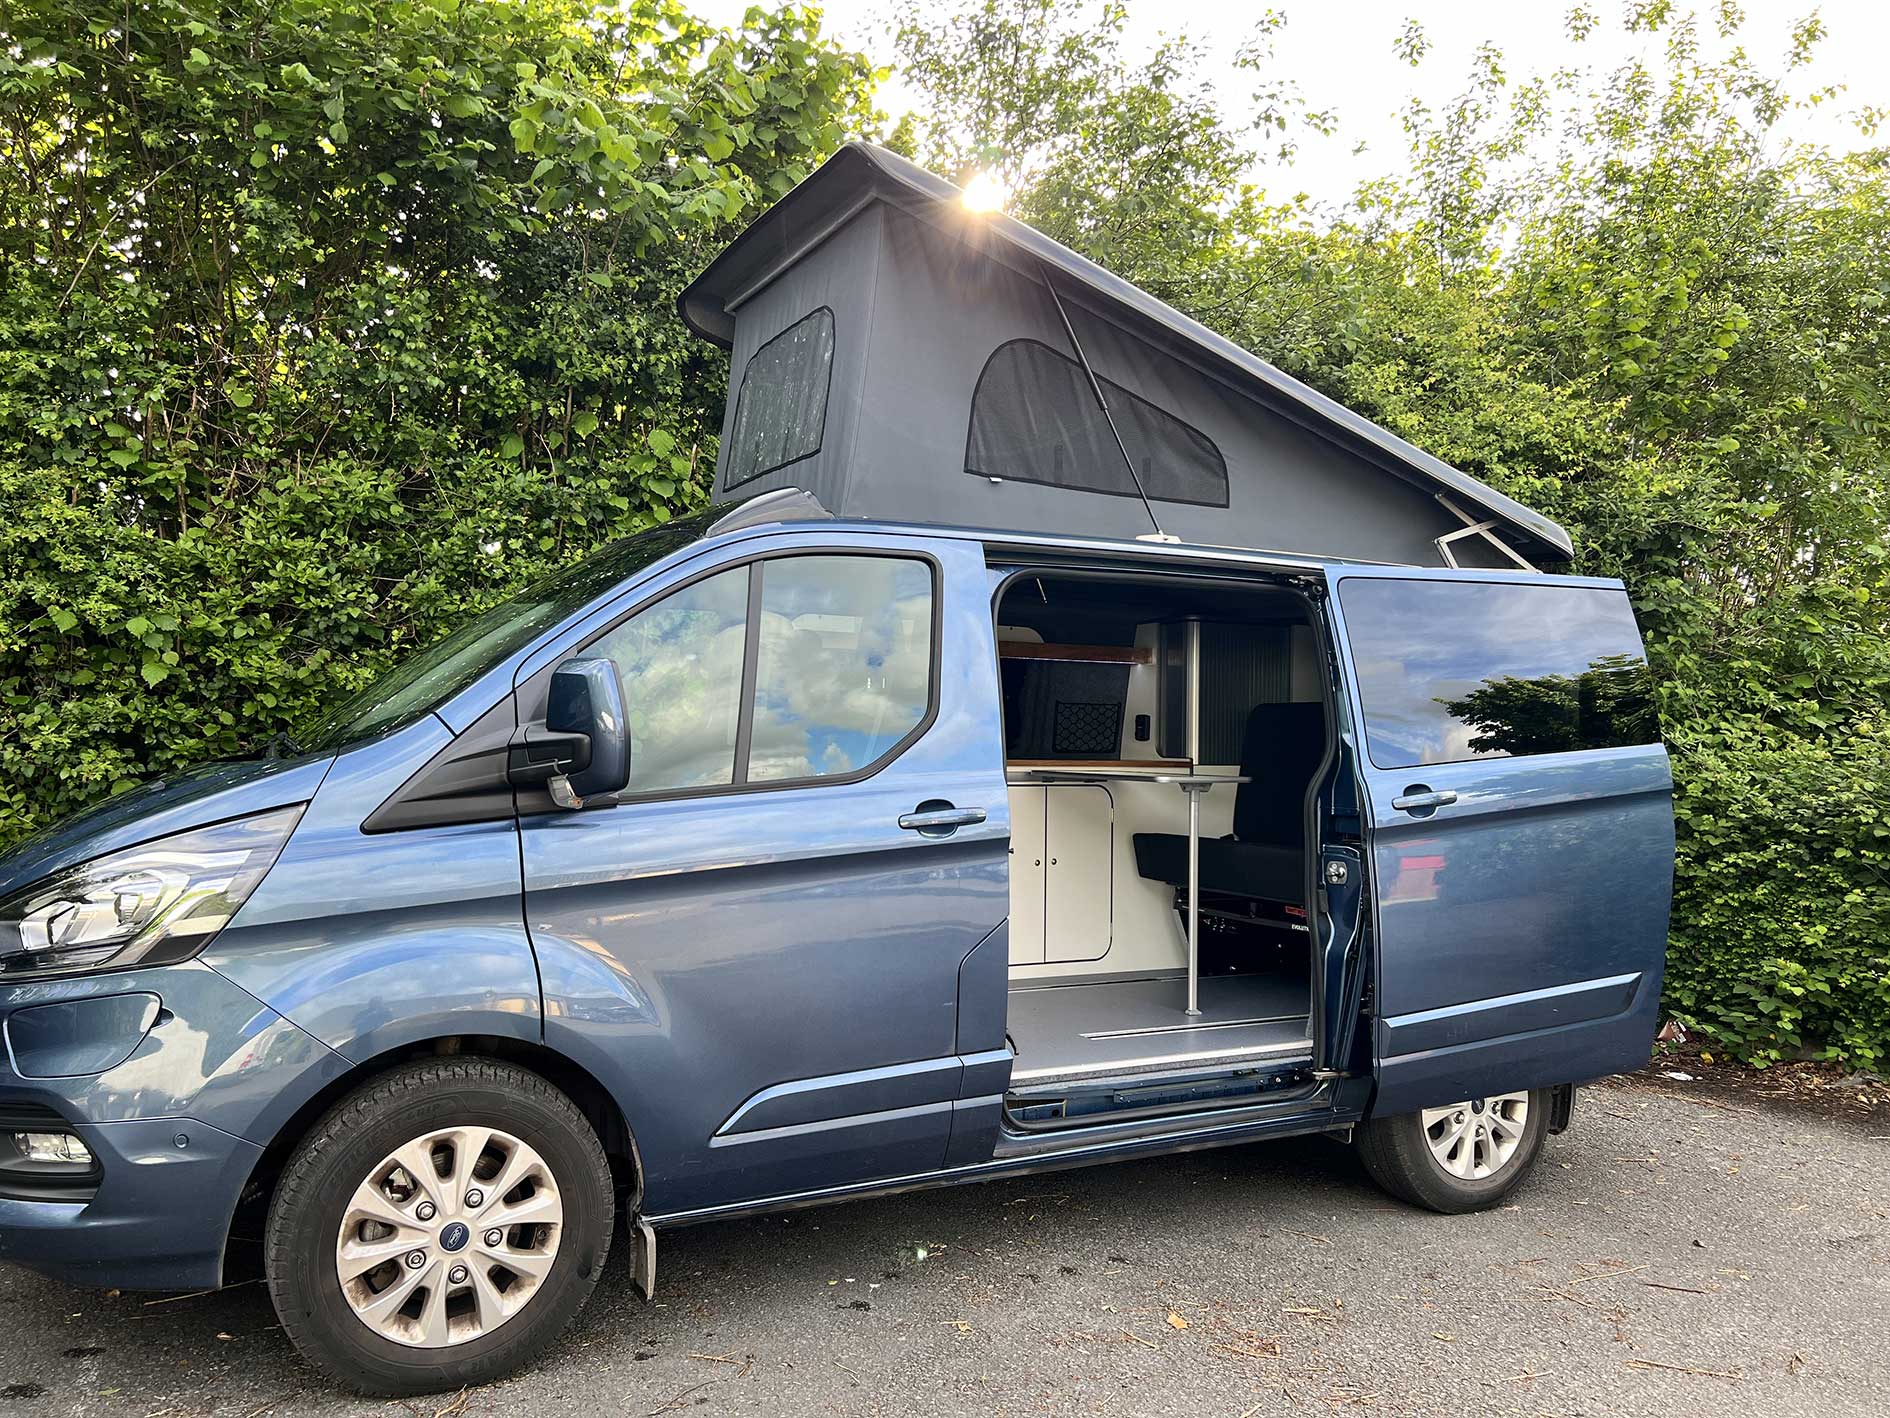 LT Conversions camper conversion with pop up roof